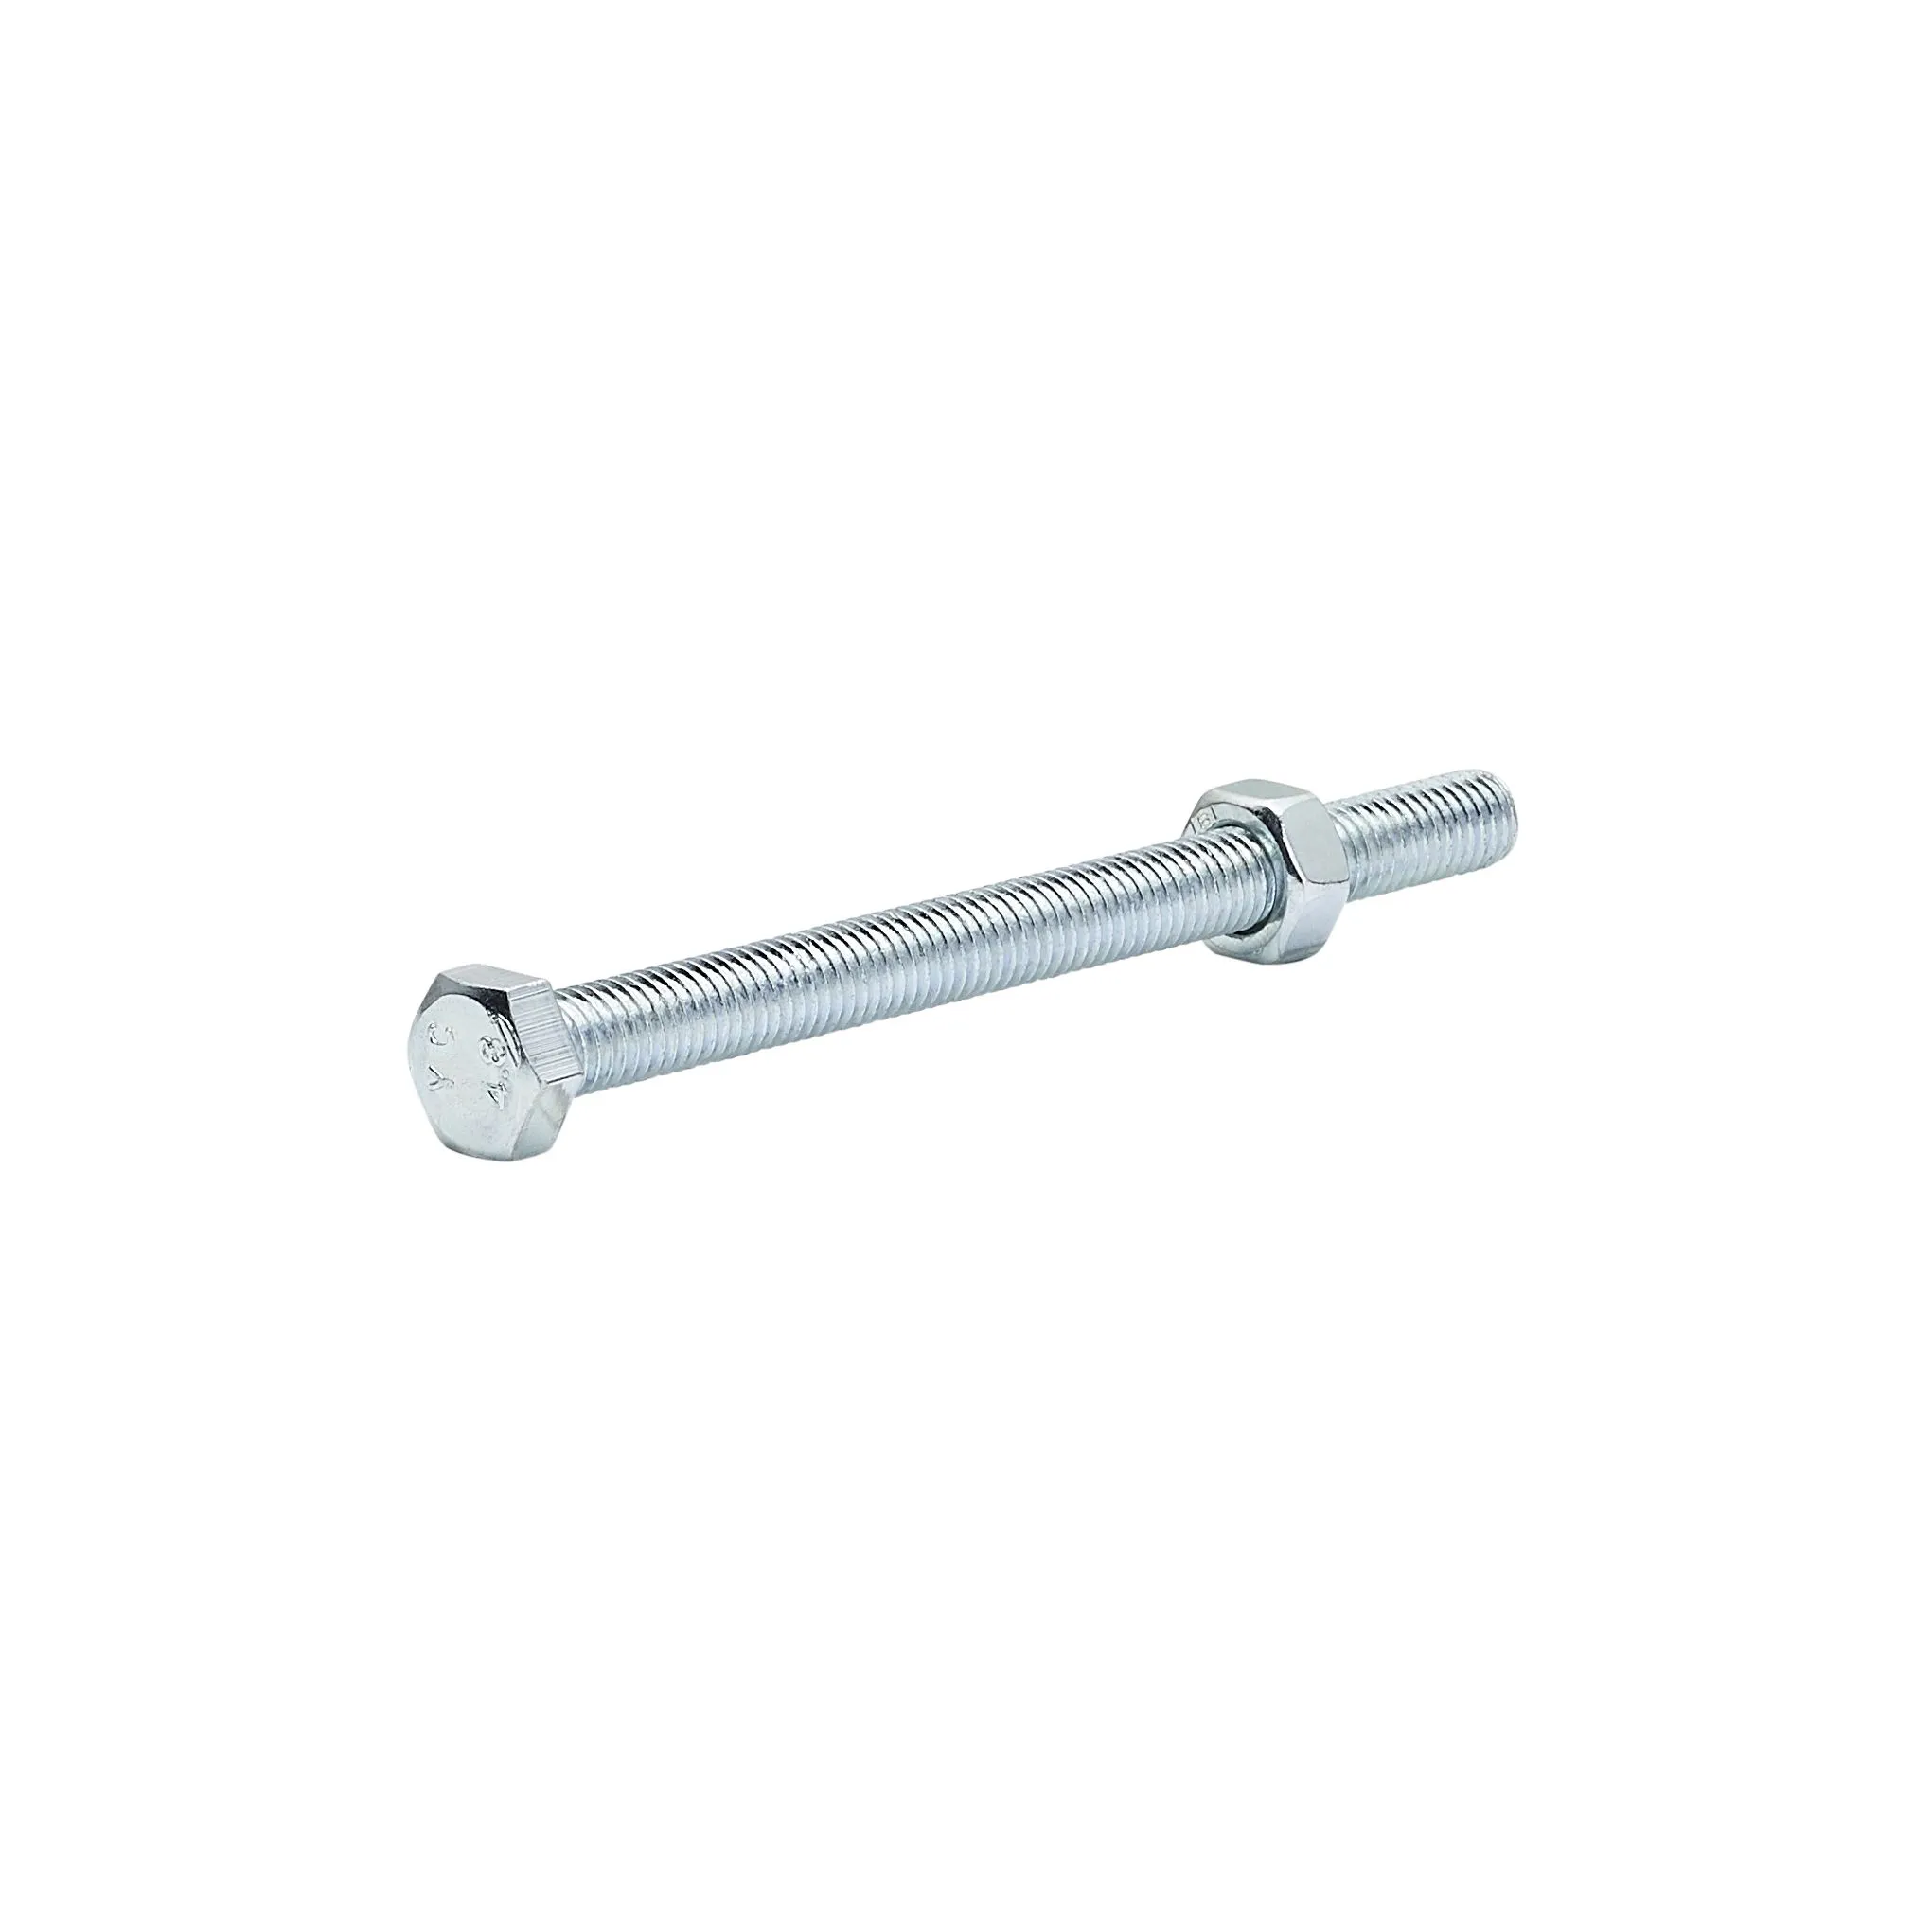 Diall M8 Hex Carbon steel (grade 5.8) Bolt & nut (L)100mm, Pack of 10